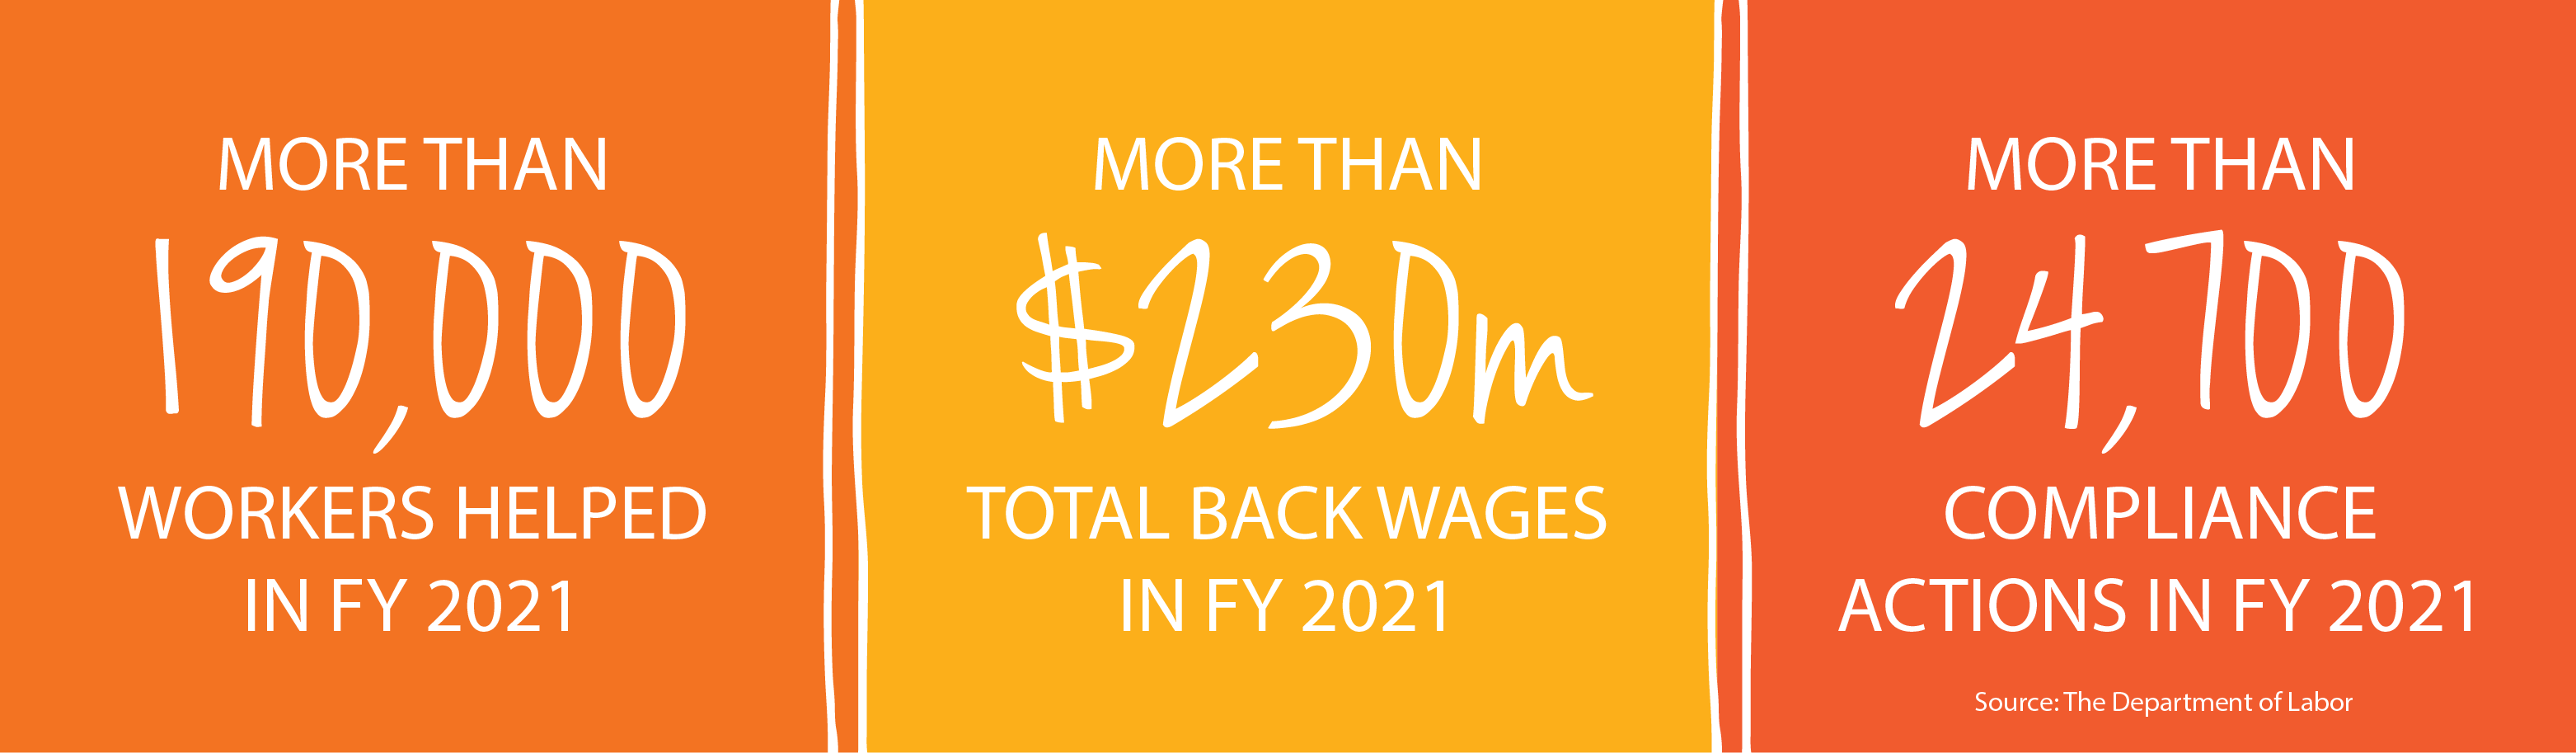 More than 24,700 compliance actions were reported in 2021, $230 million in back wages were paid and more than 190,000 workers were assisted.